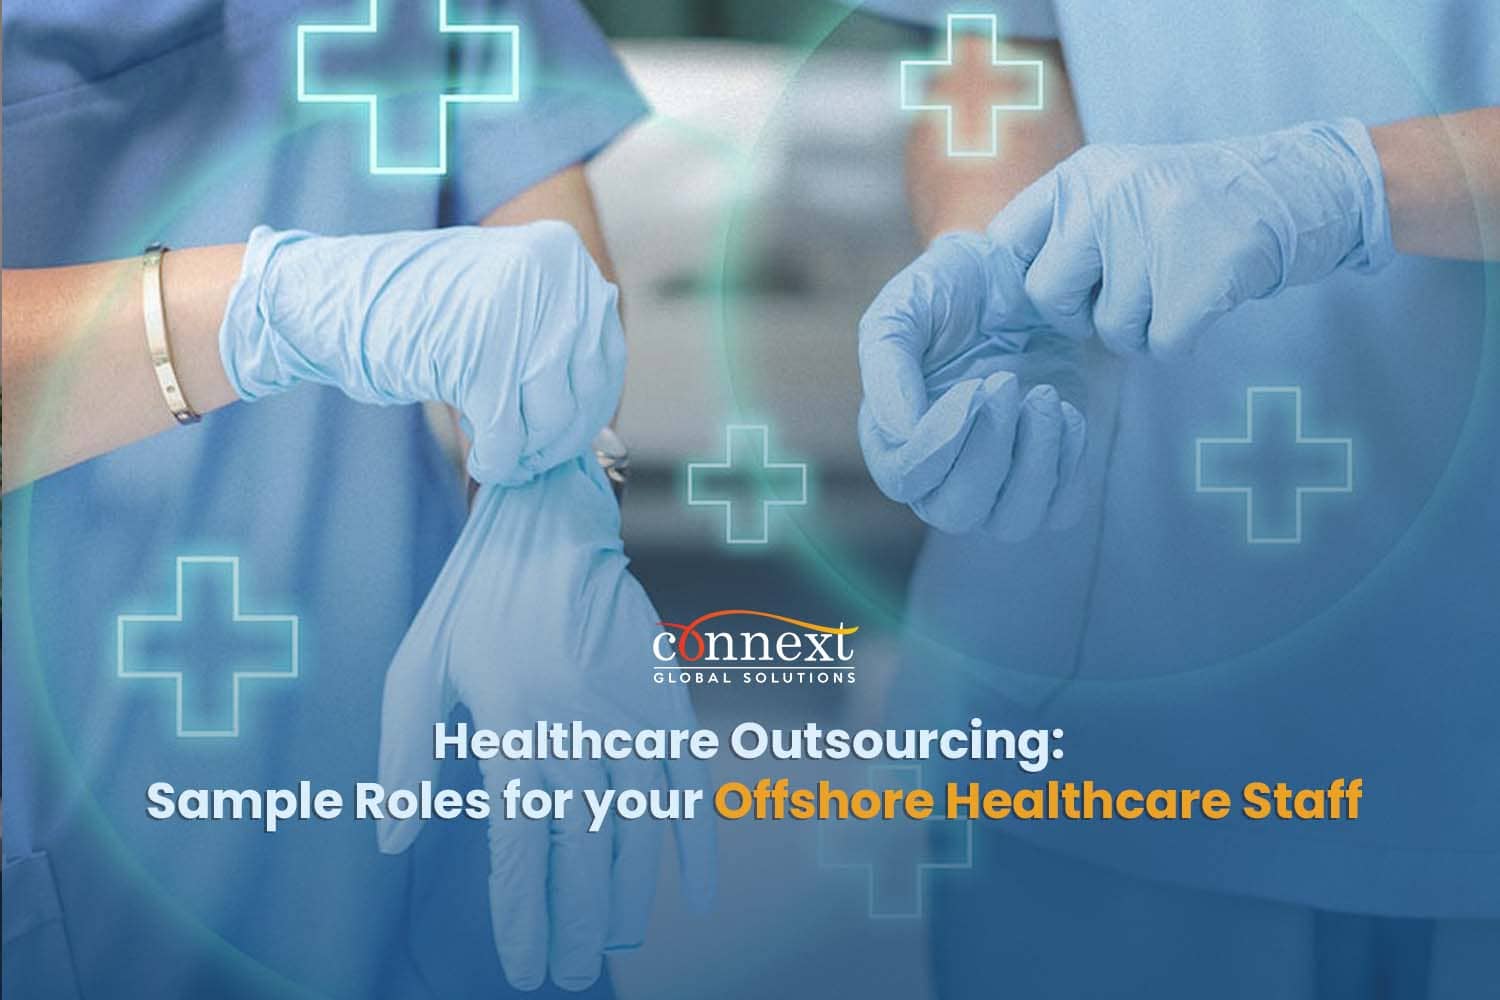 Healthcare Outsourcing: Sample Roles for your Offshore Healthcare Staff